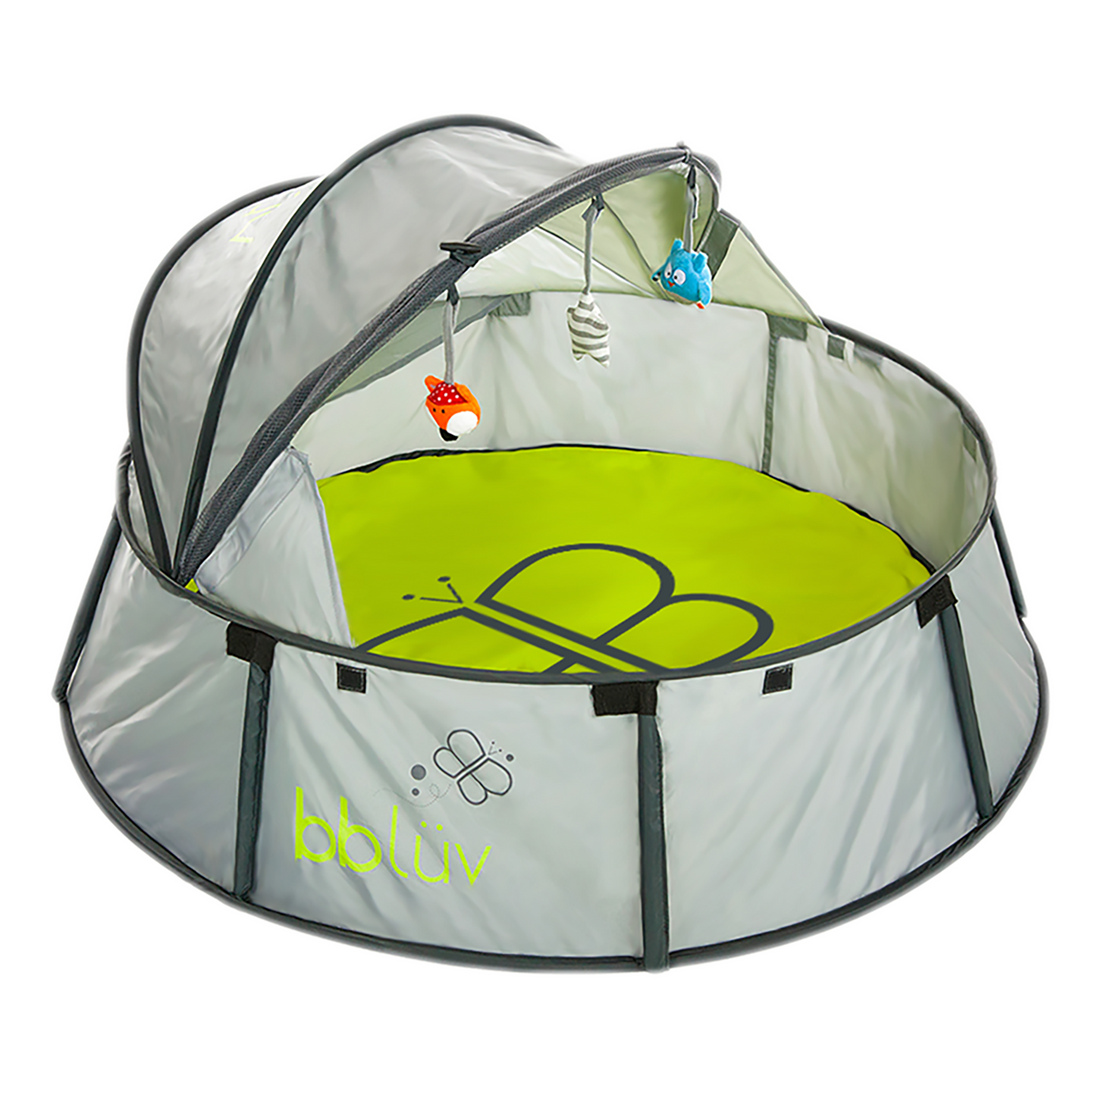 Nido - 2 in 1 Travel & Play Tent